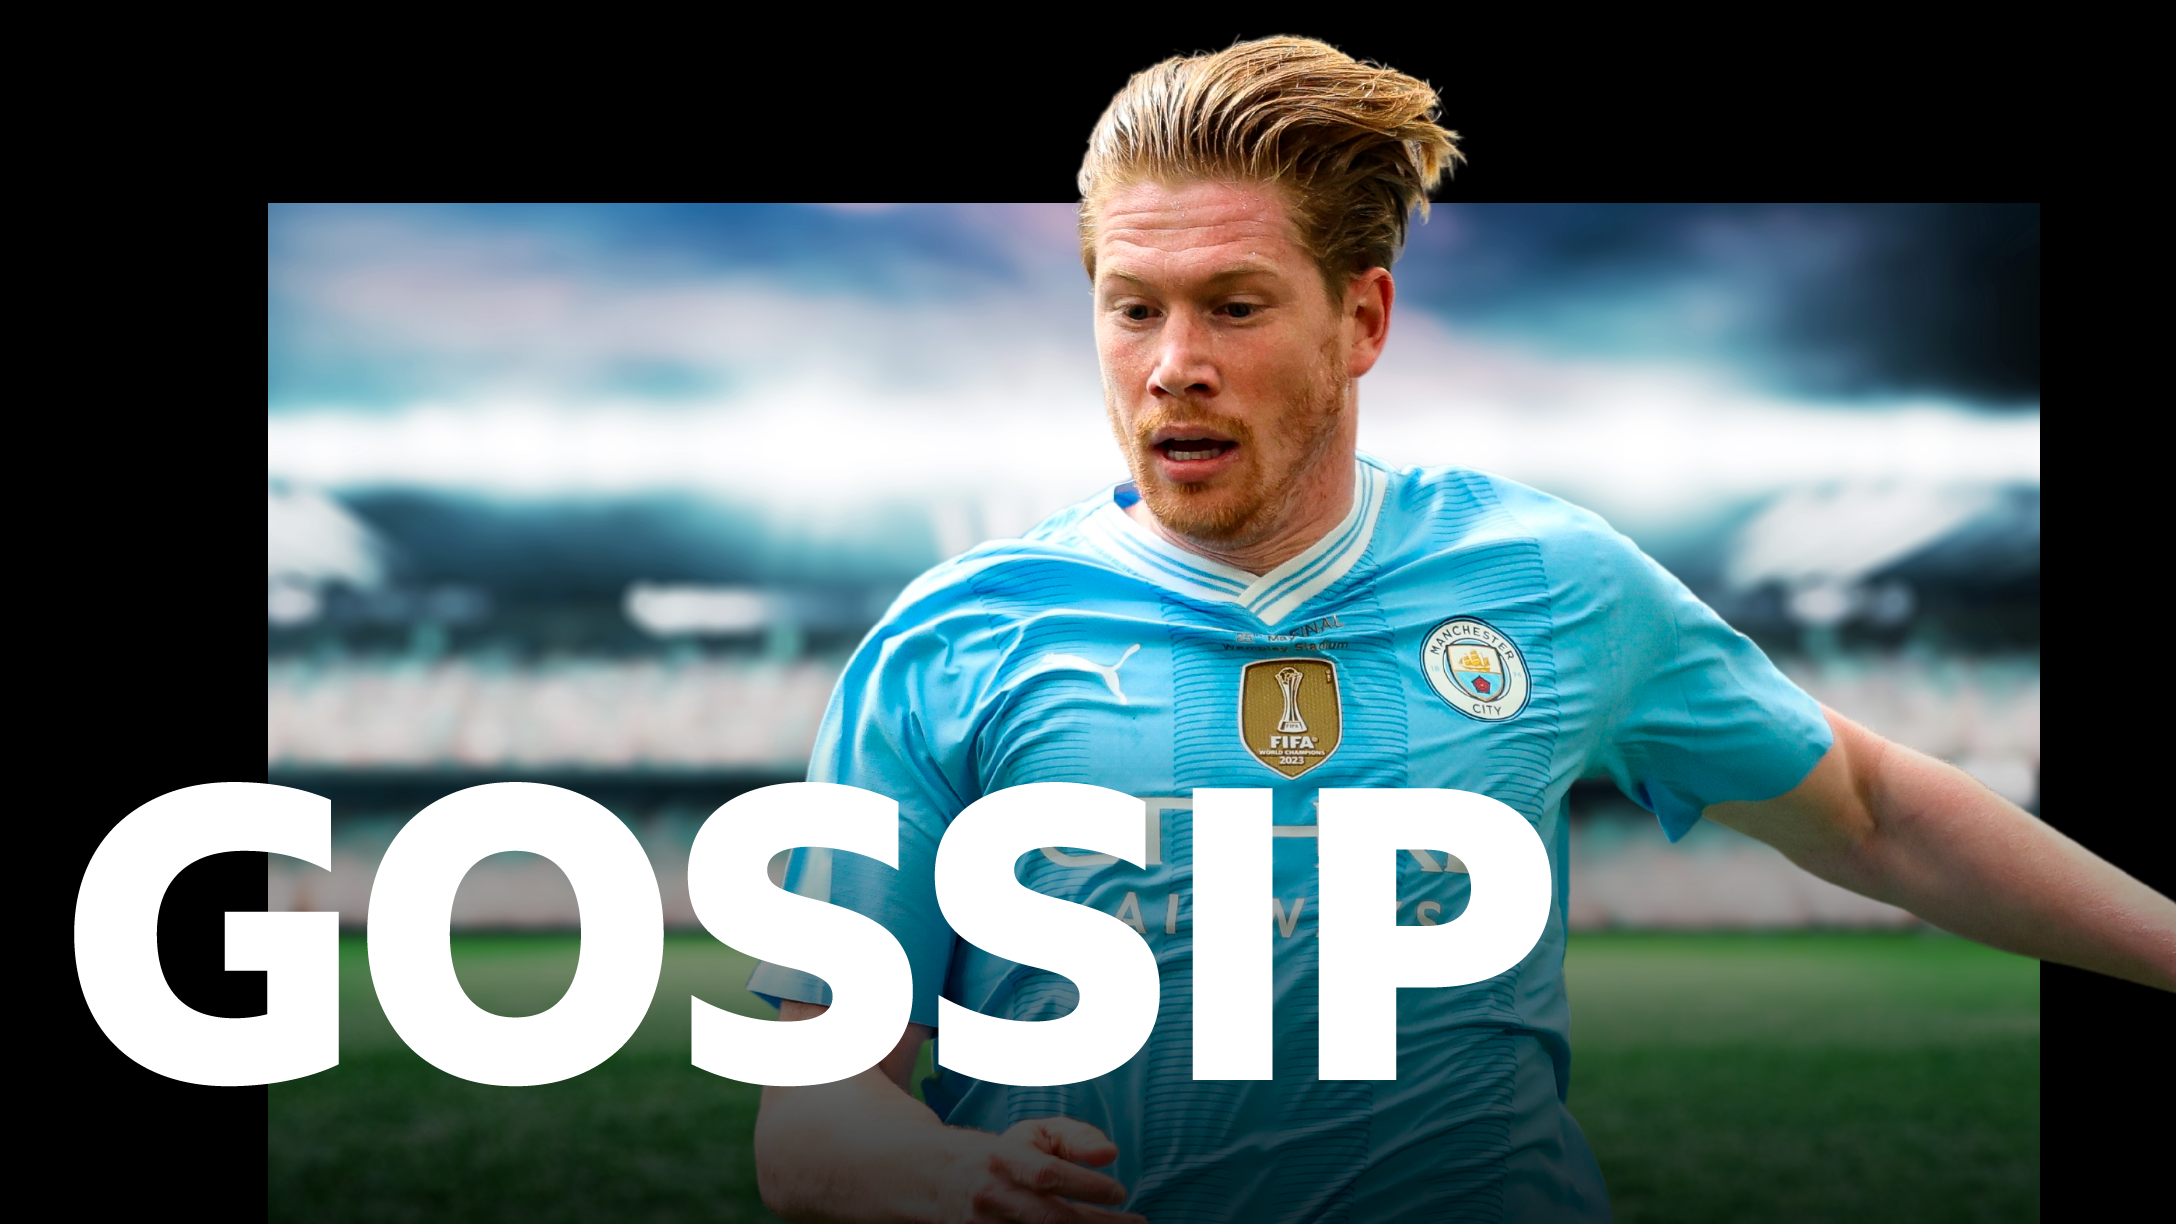 De Bruyne expected to stay at Man City - Sunday's gossip